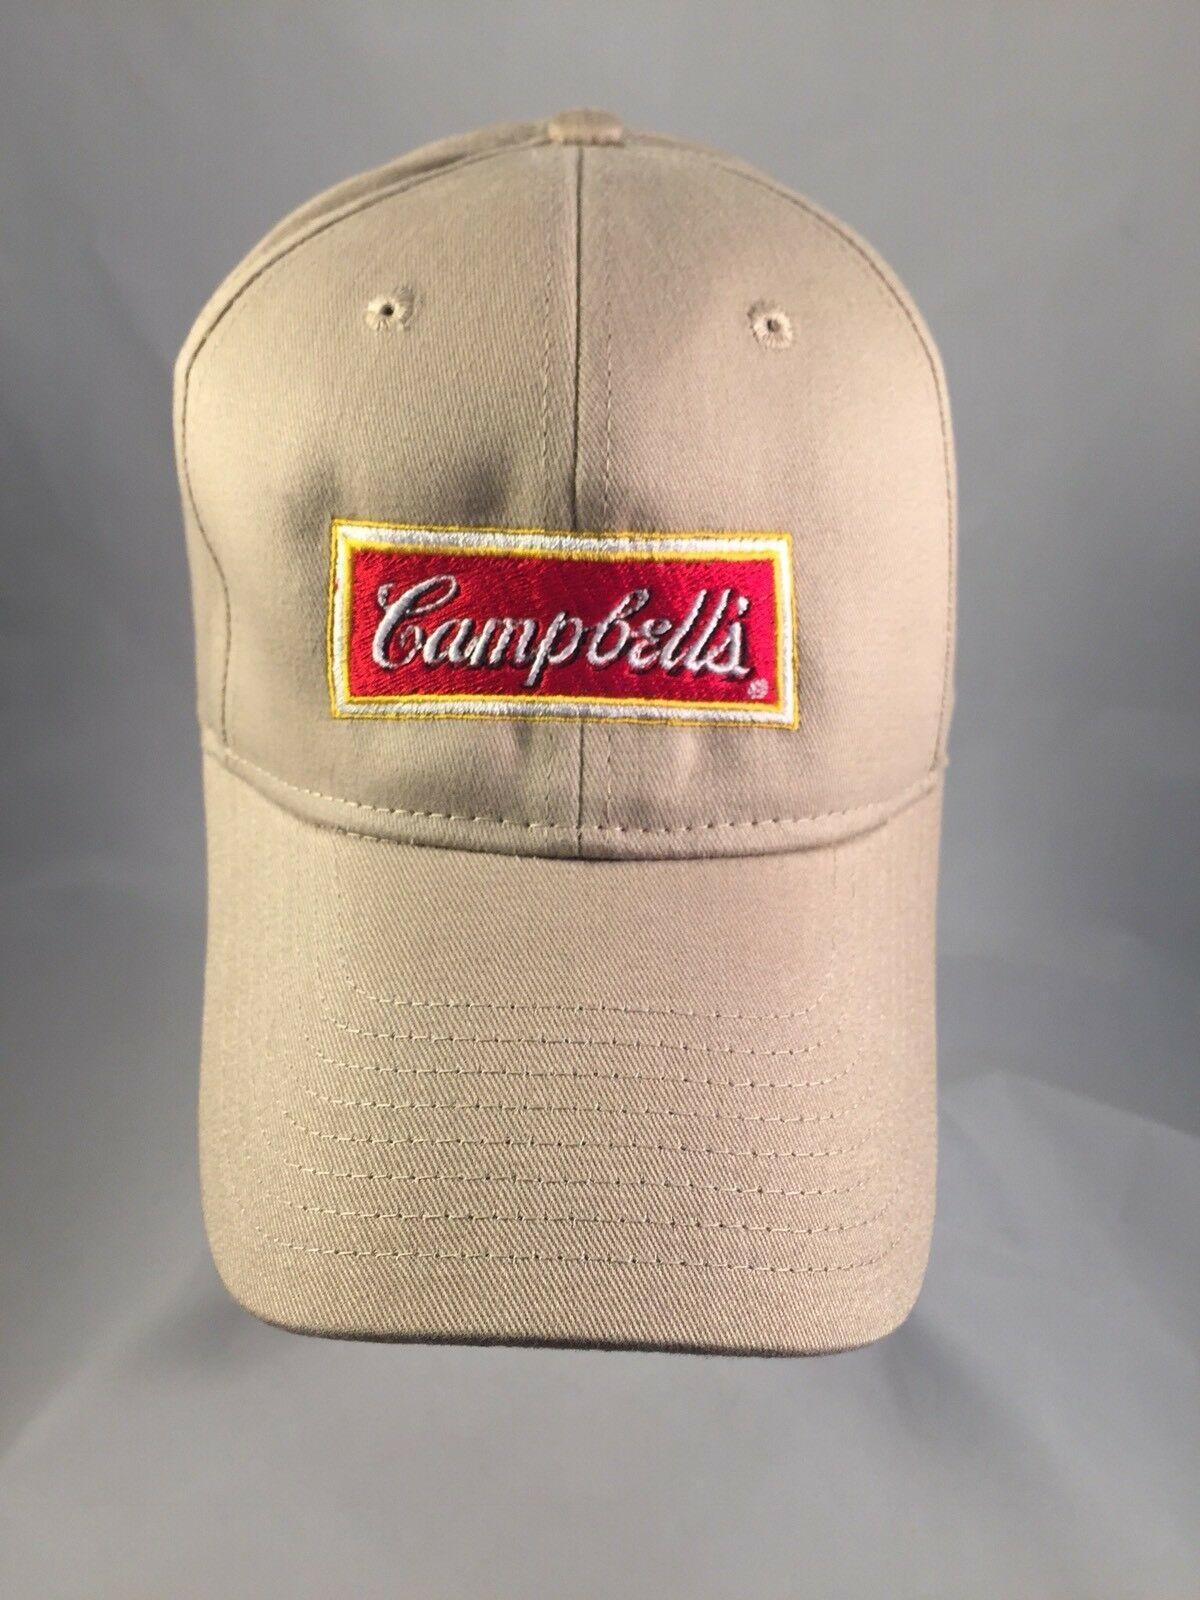 Campbell's Soup Company Logo - Tan Embroidered Campbell's Soup Company Logo Embroidered Baseball ...